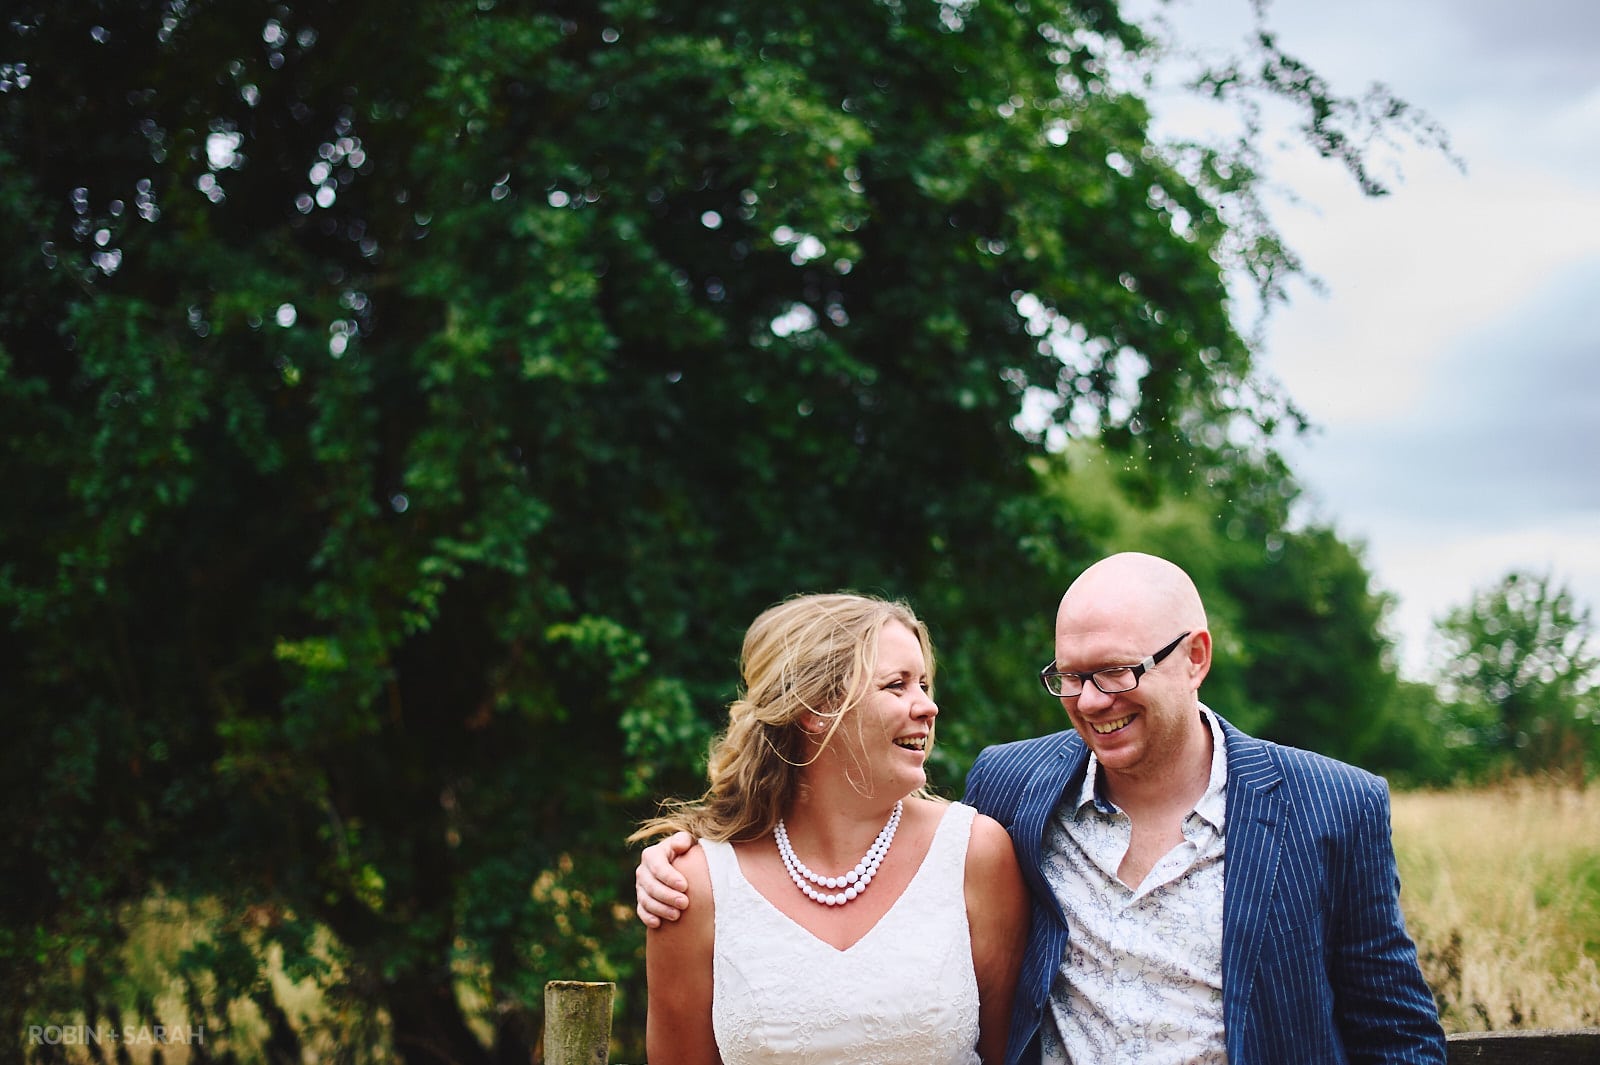 Bride and groom laughing together in beautiful gardens